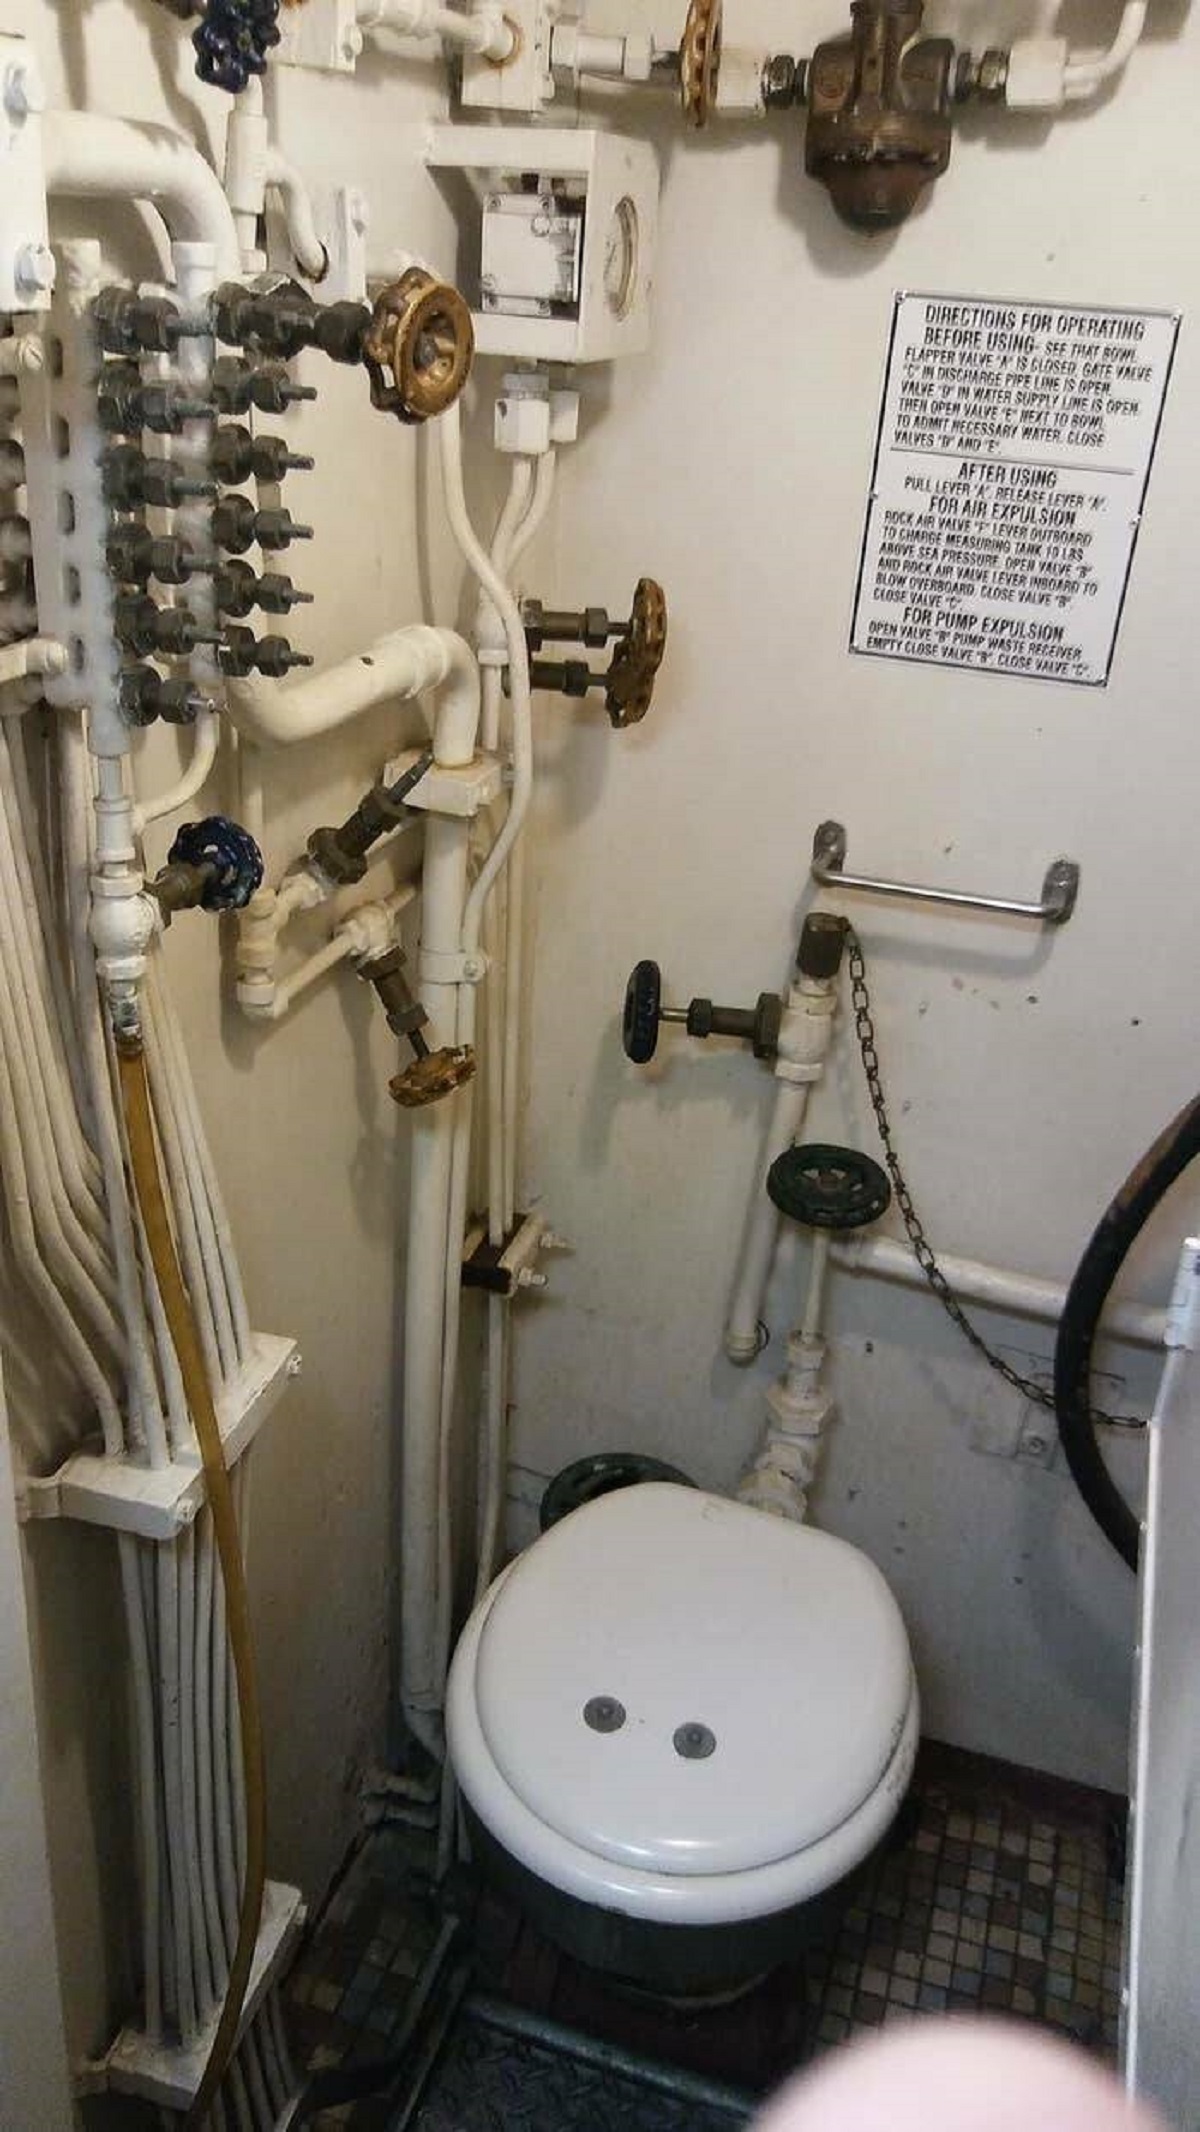 This is what the toilet on a submarine looks like: